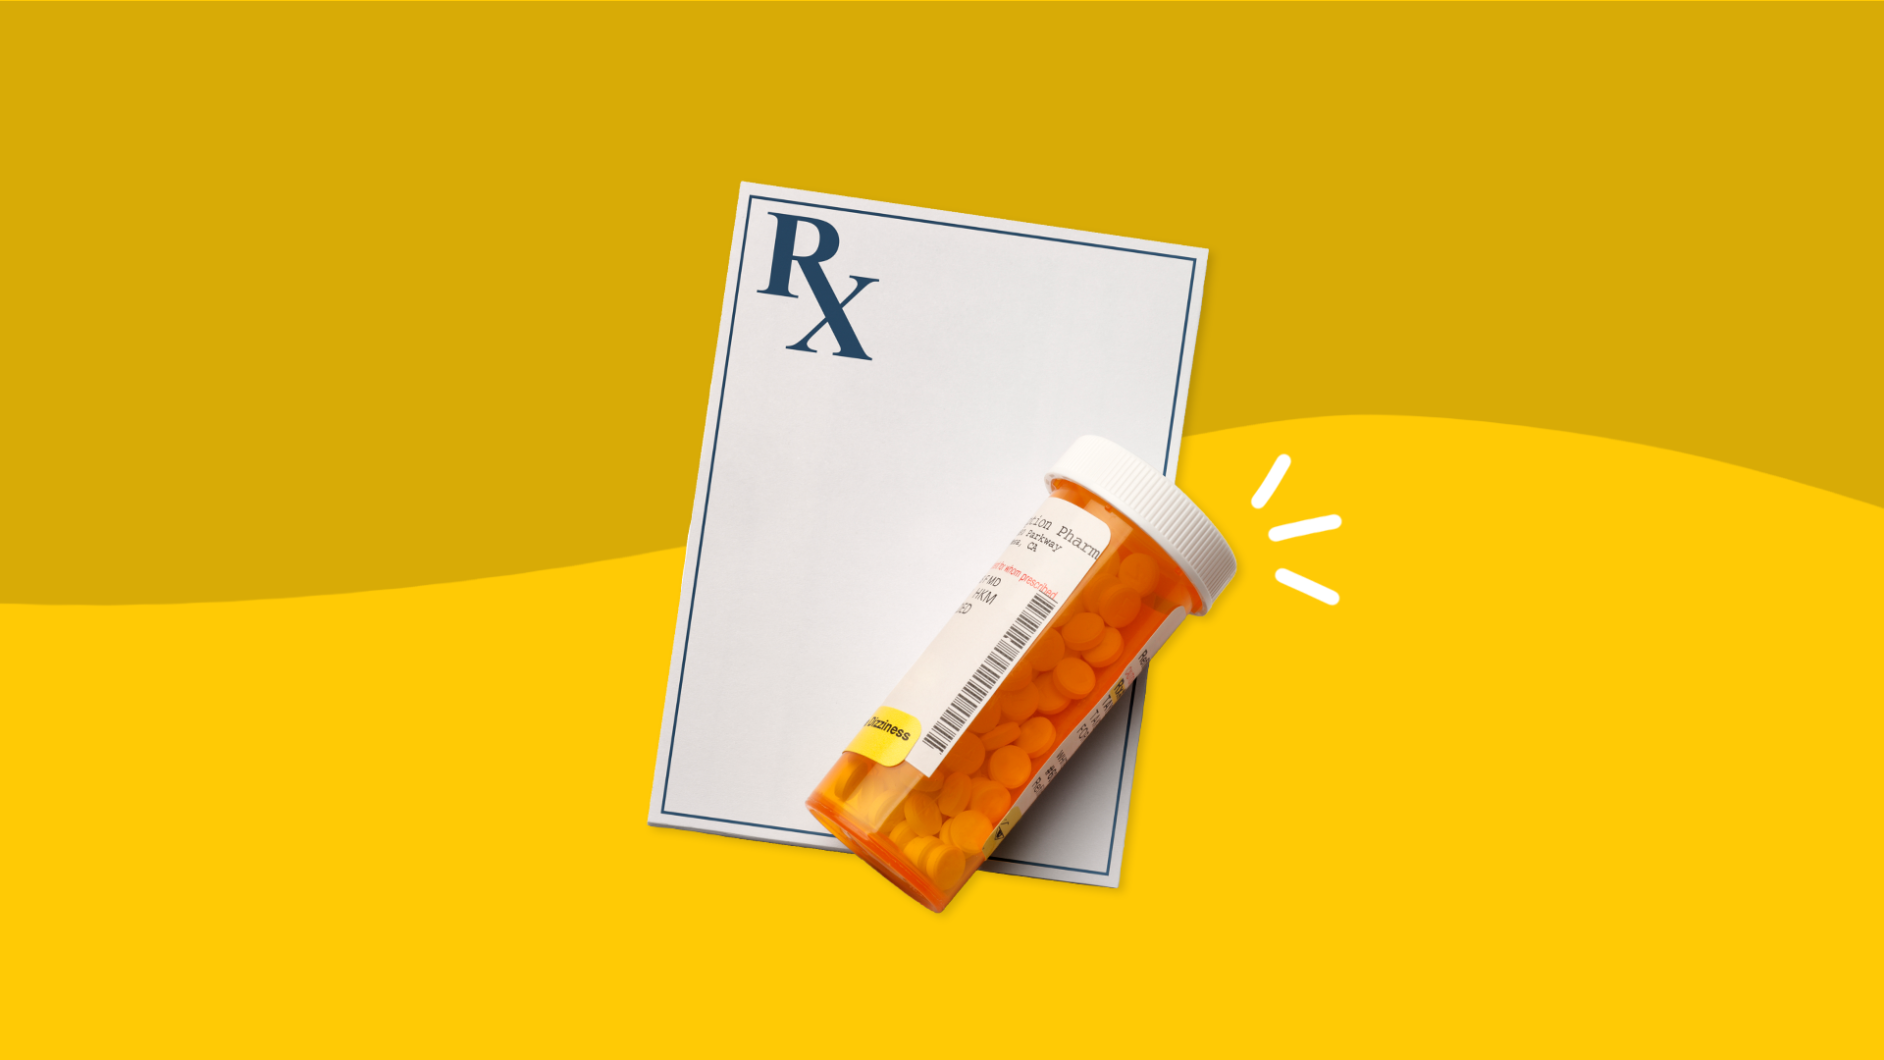 Prescription pad with pill bottle - Adderall shortage